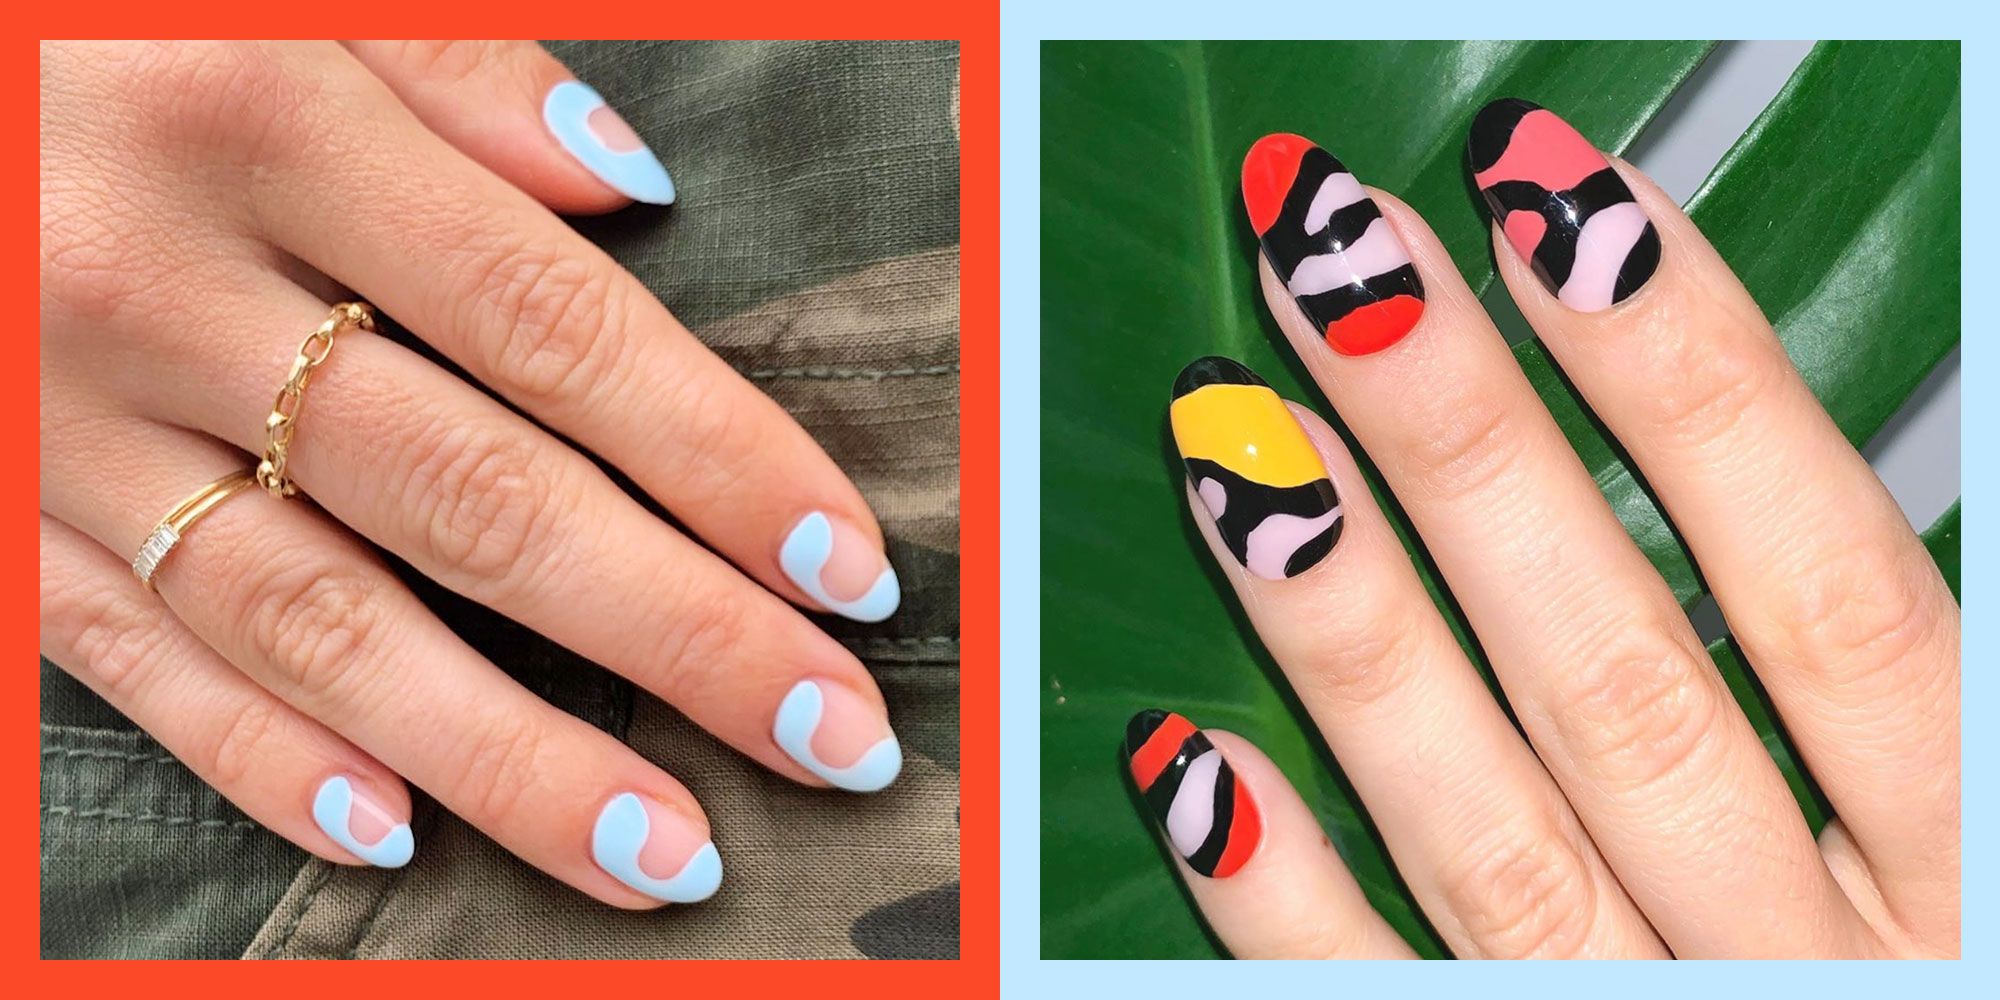 2. "January Nail Color Trends to Try in 2021" - wide 1